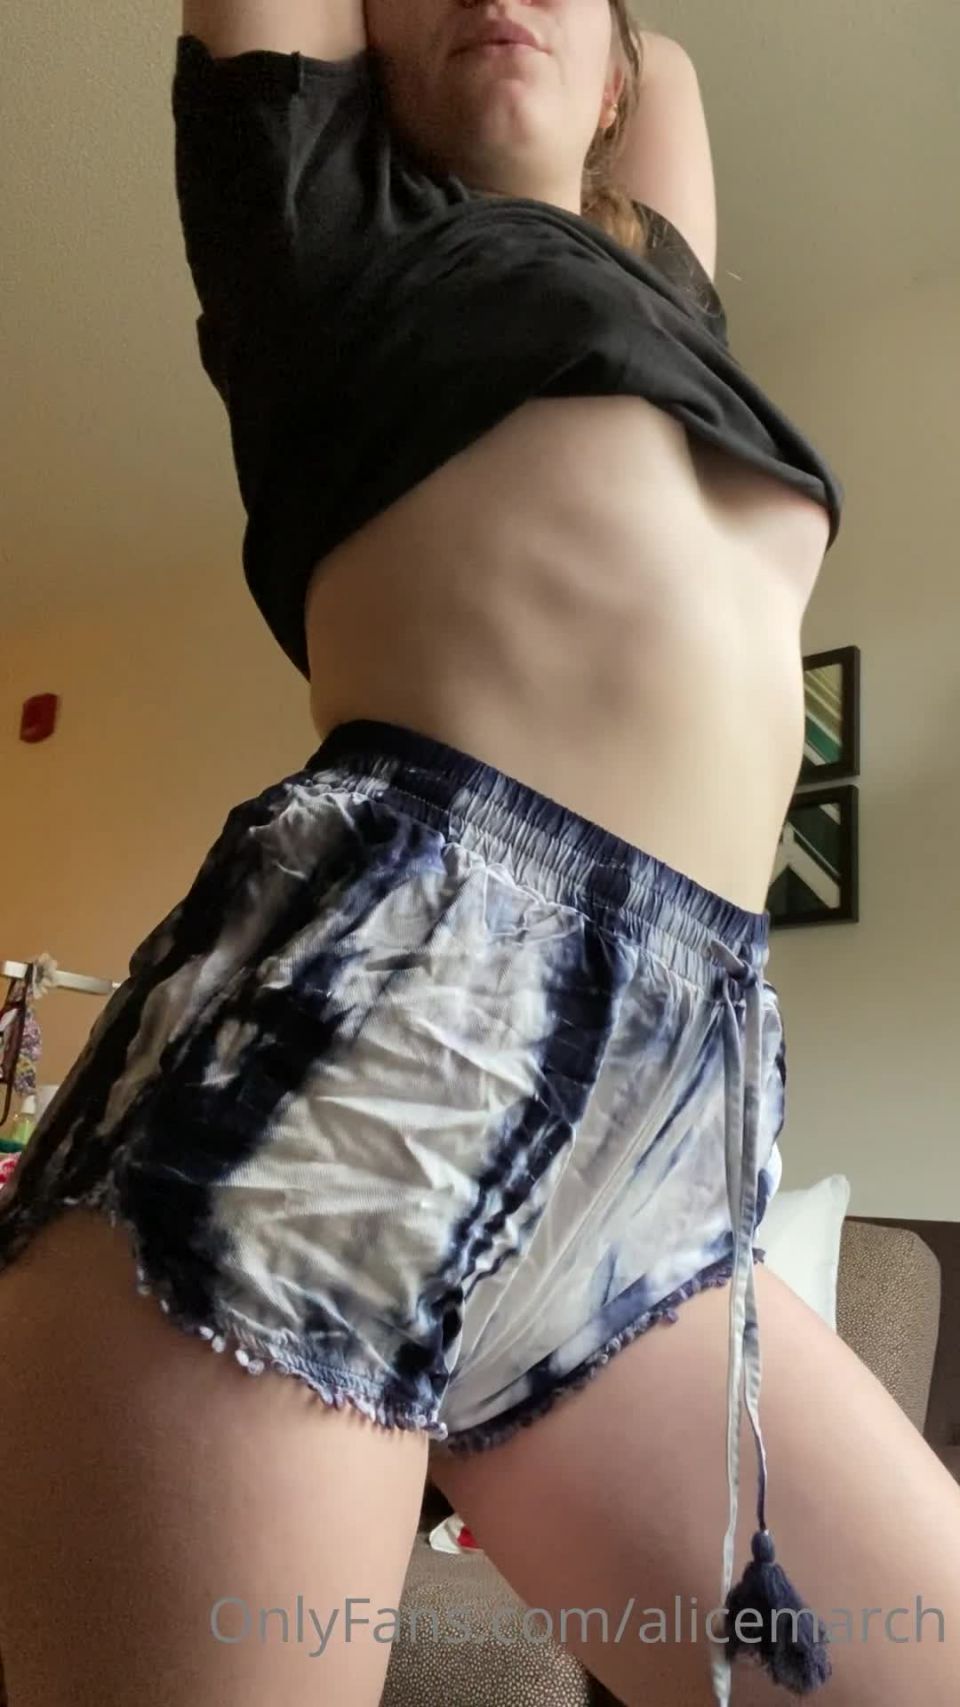 Alice march () Alicemarch - these shorts are really helping with learning how to move my cheeks 29-11-2020